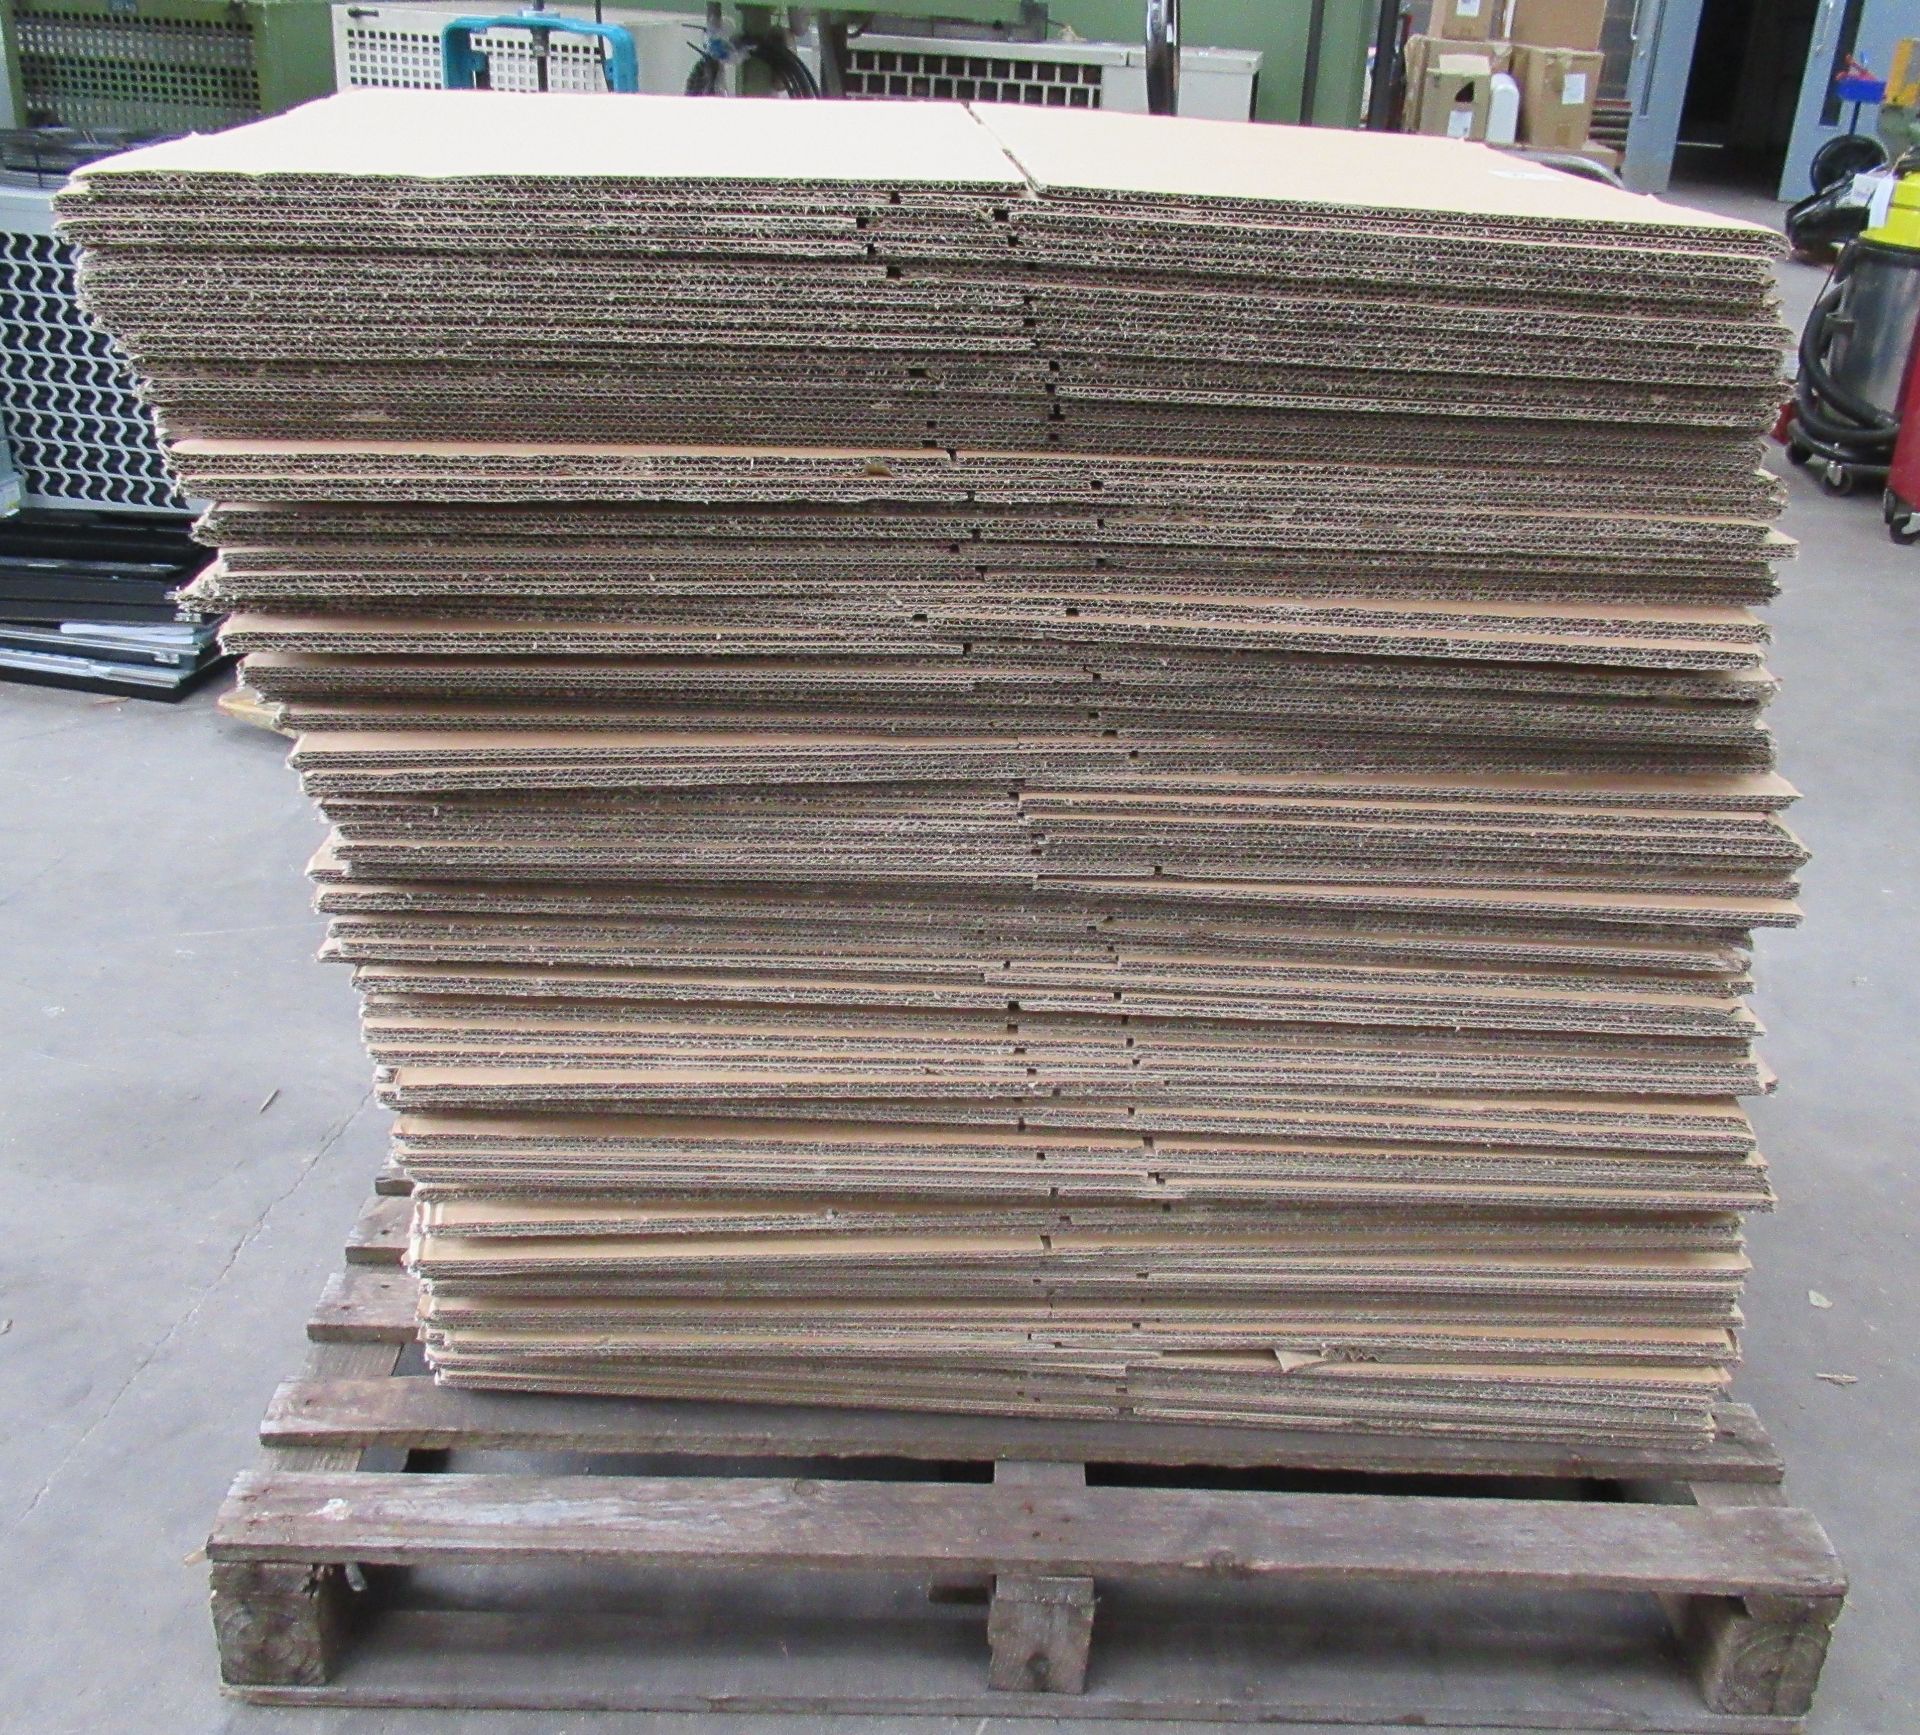 A Pallet of Cardboard Boxes - Image 4 of 4